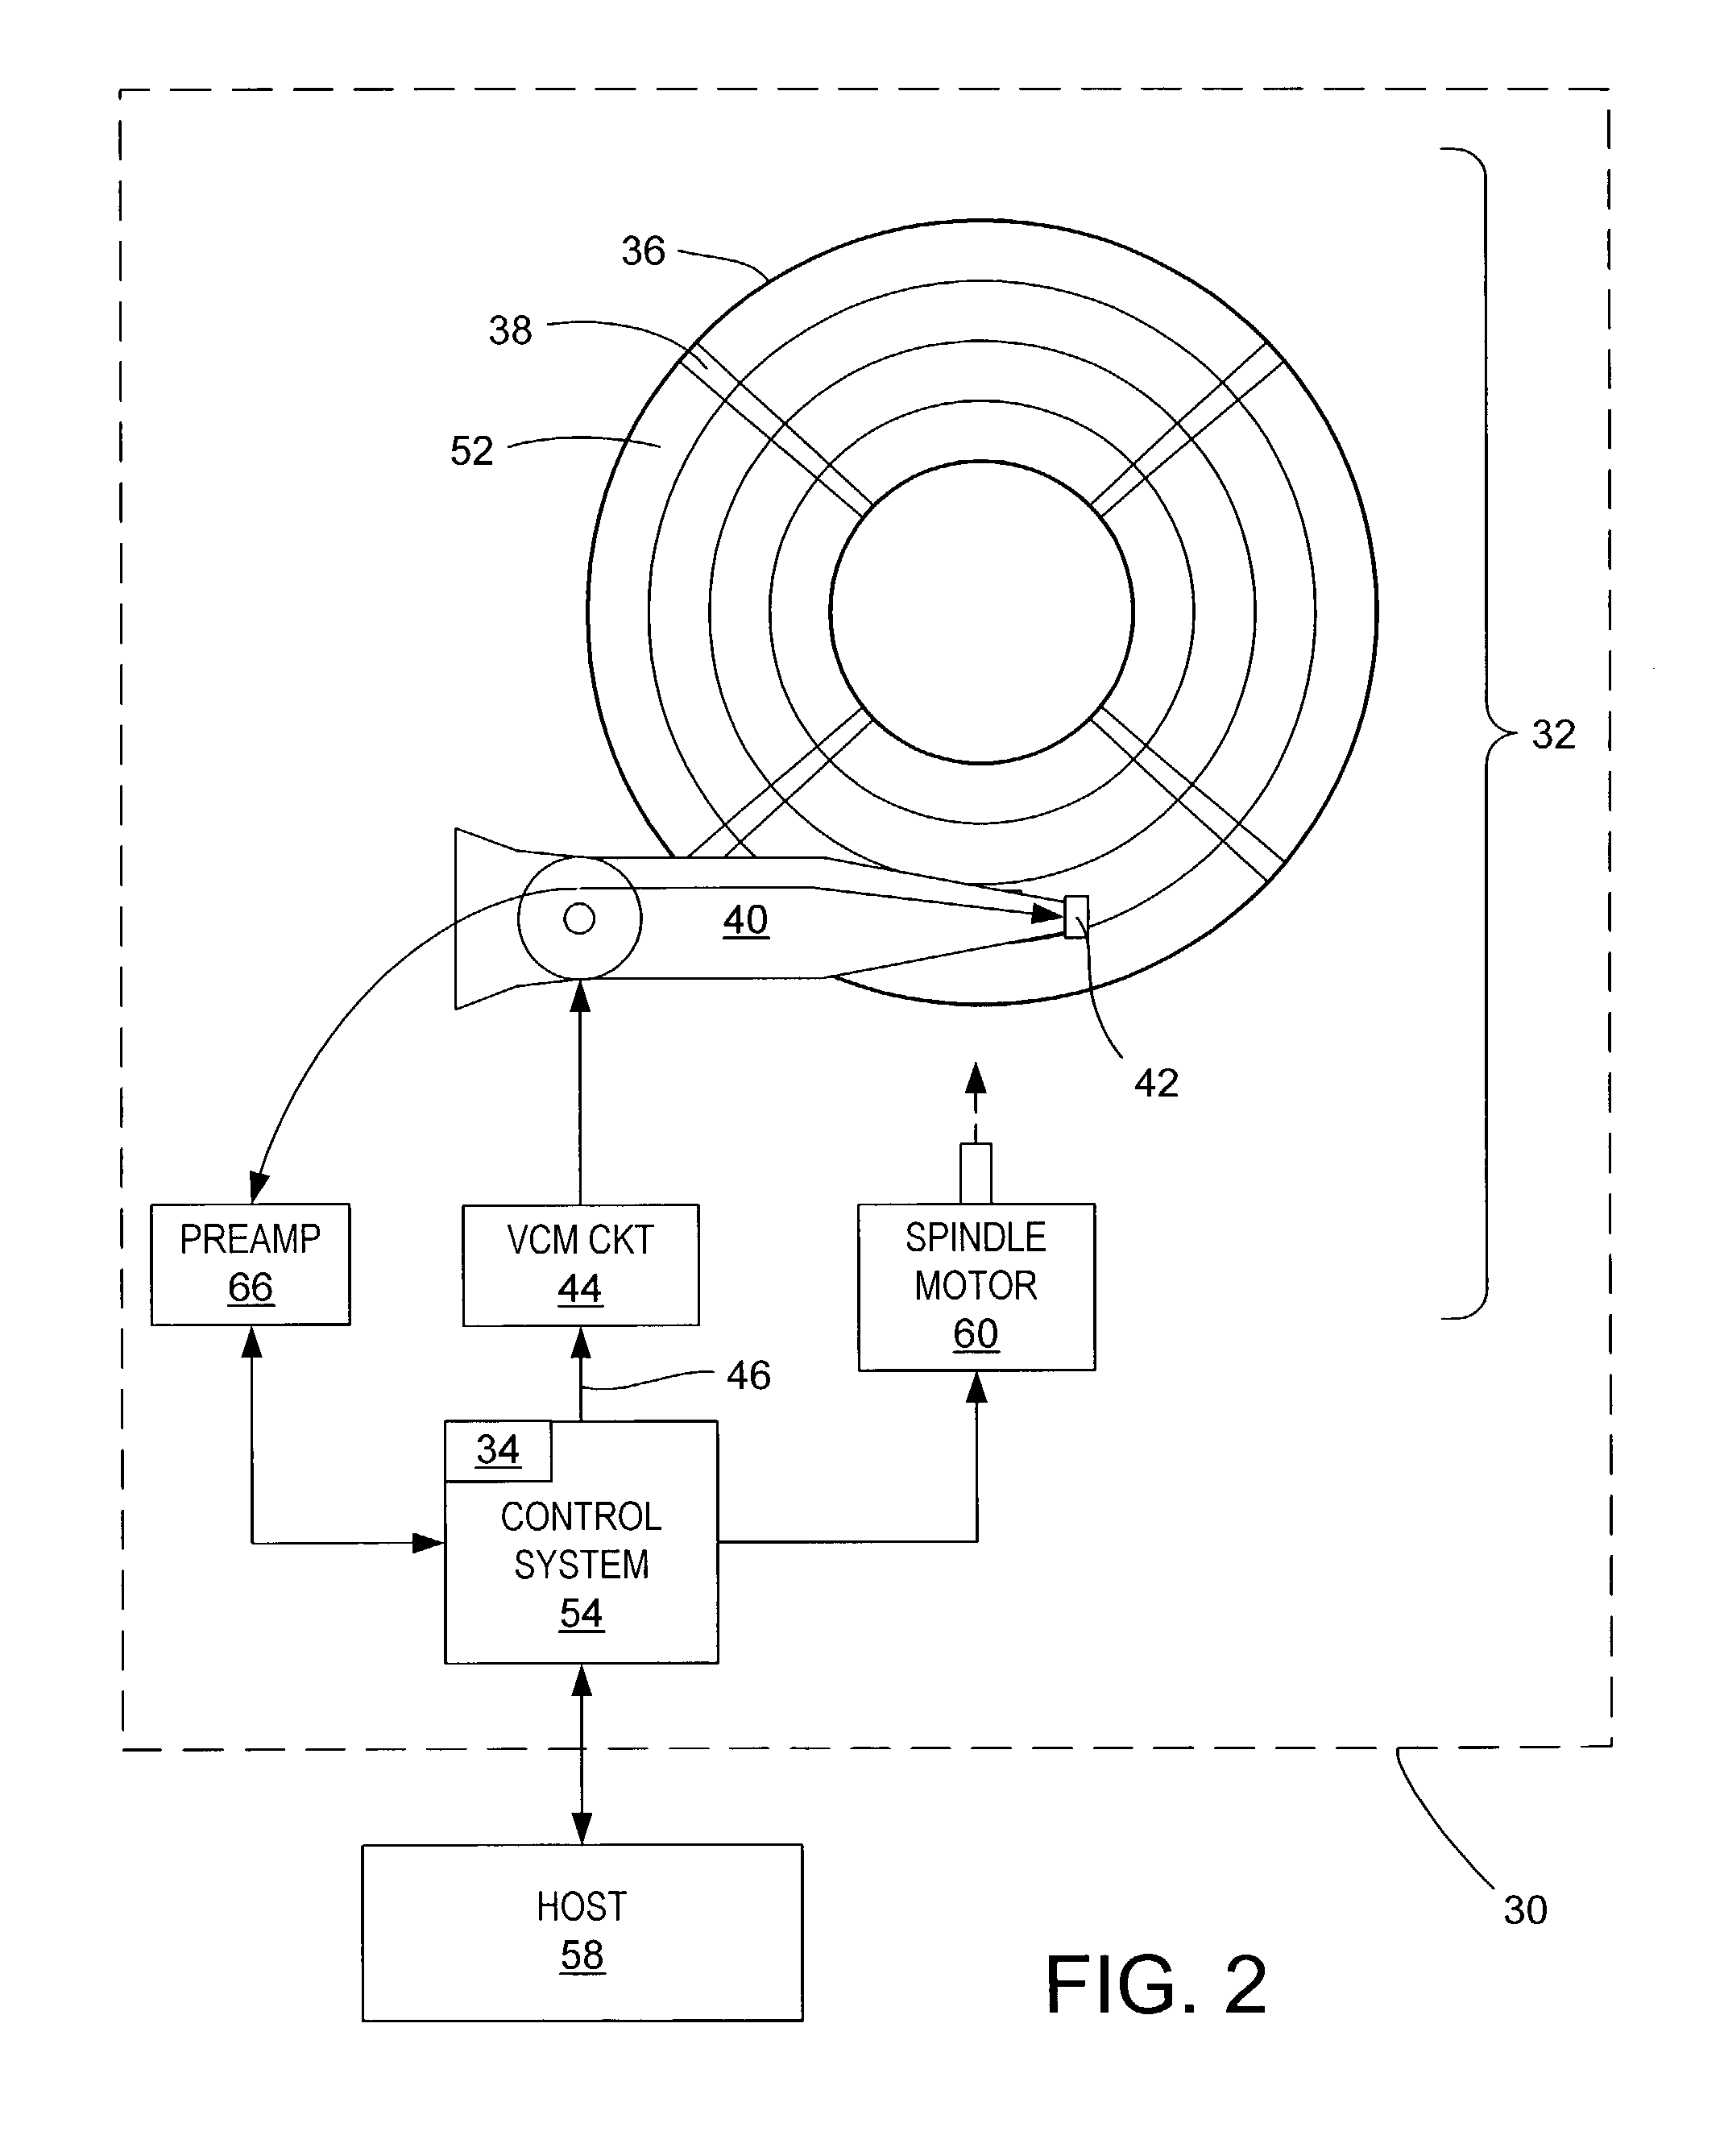 Method and apparatus for self servowriting of tracks of a disk drive using an observer based on an equivalent one-dimensional state model